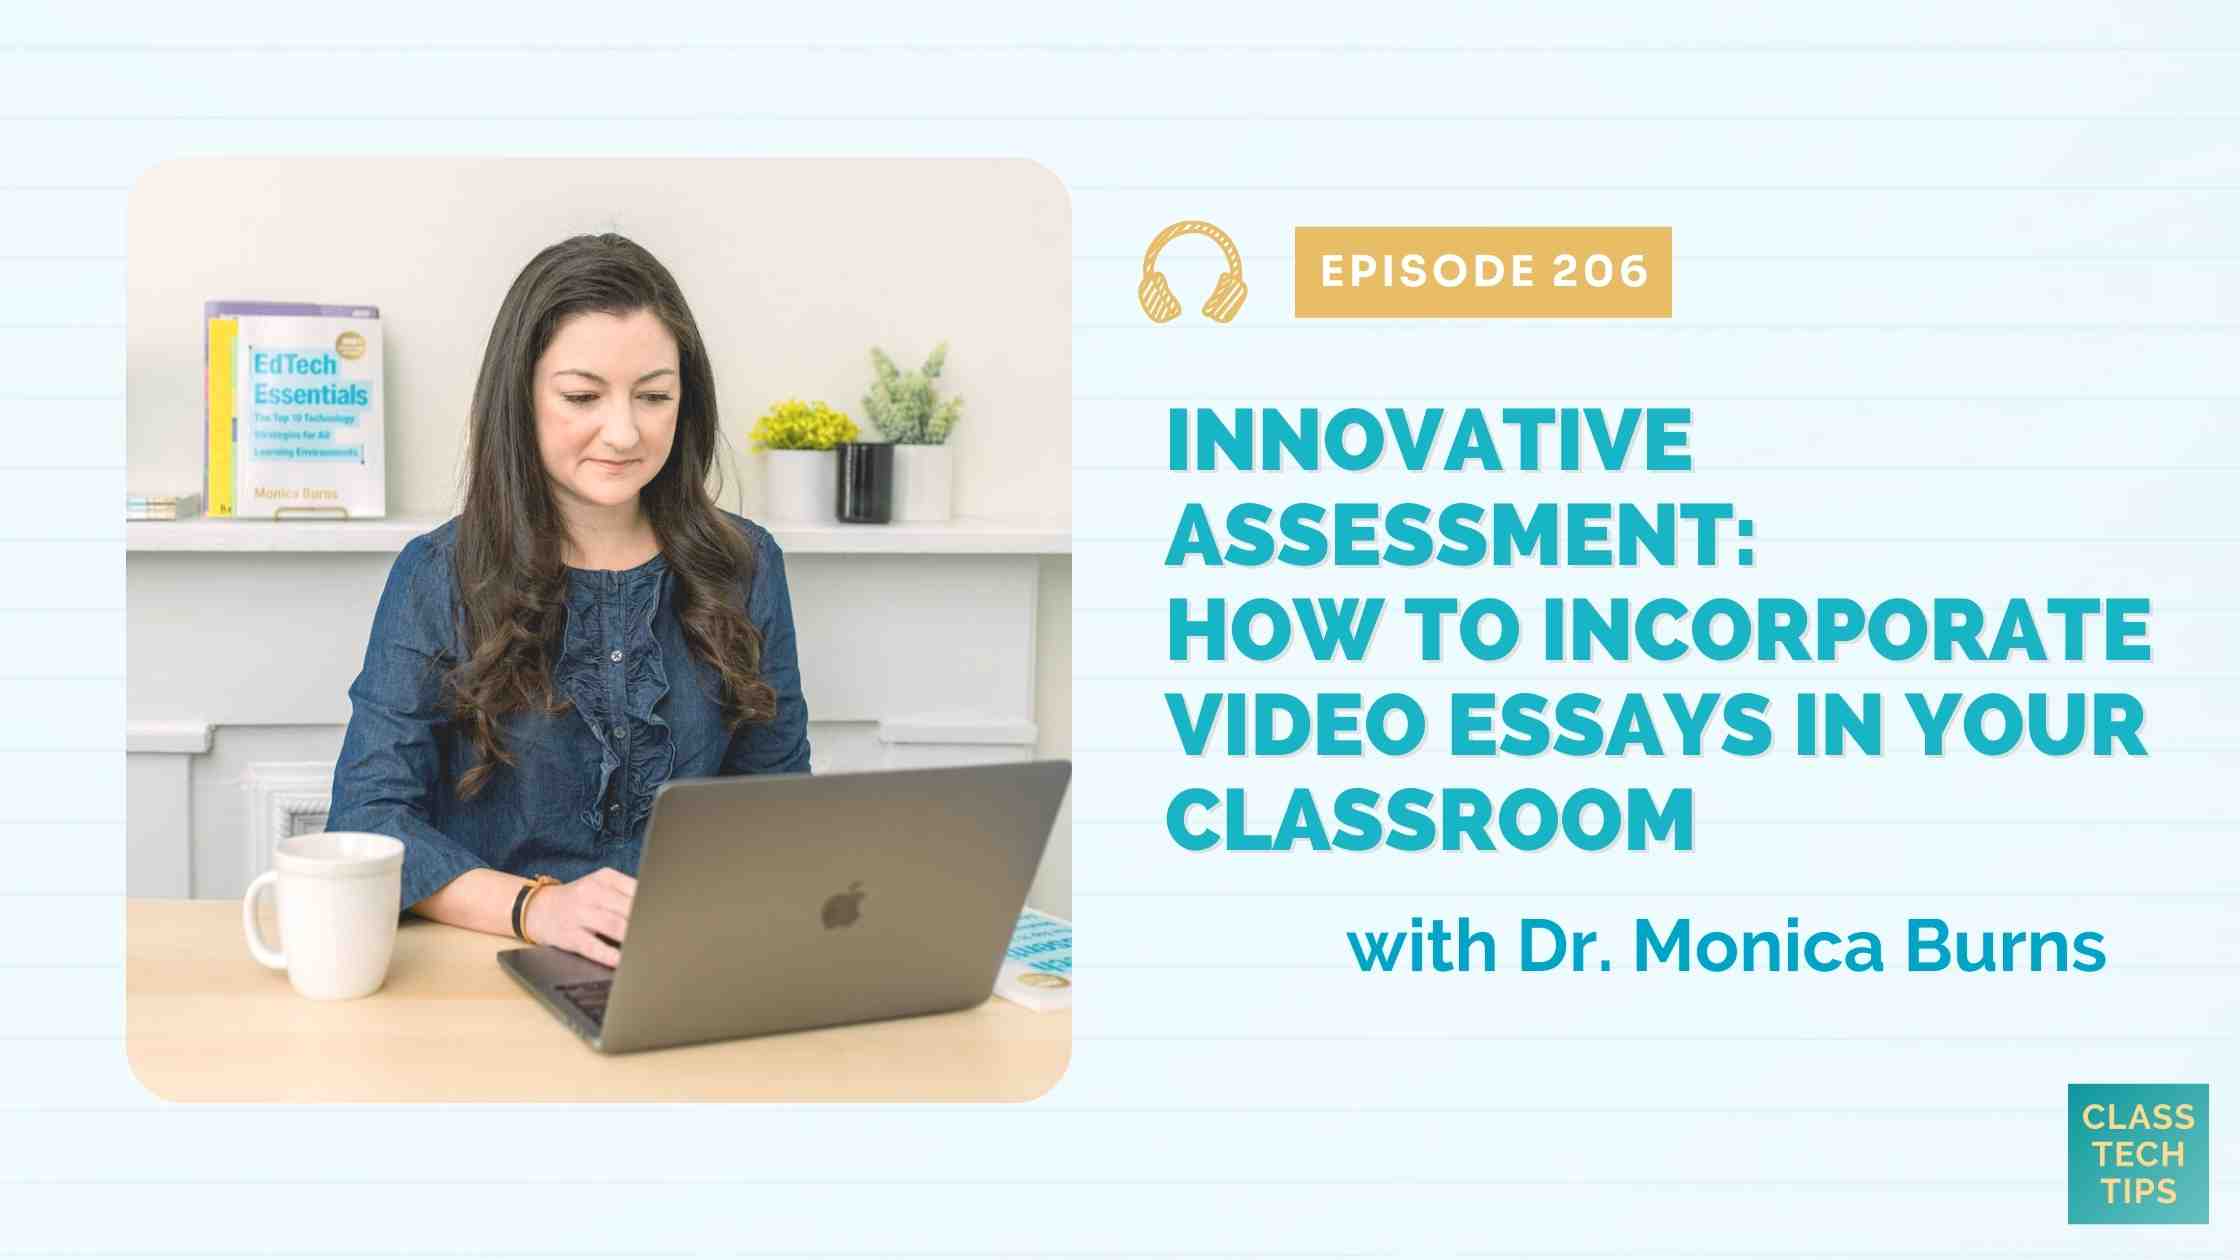 Class Rum Xxx Video - Innovative Assessment How to Incorporate Video Essays in Your Classroom -  Easy EdTech Podcast 206 - Class Tech Tips